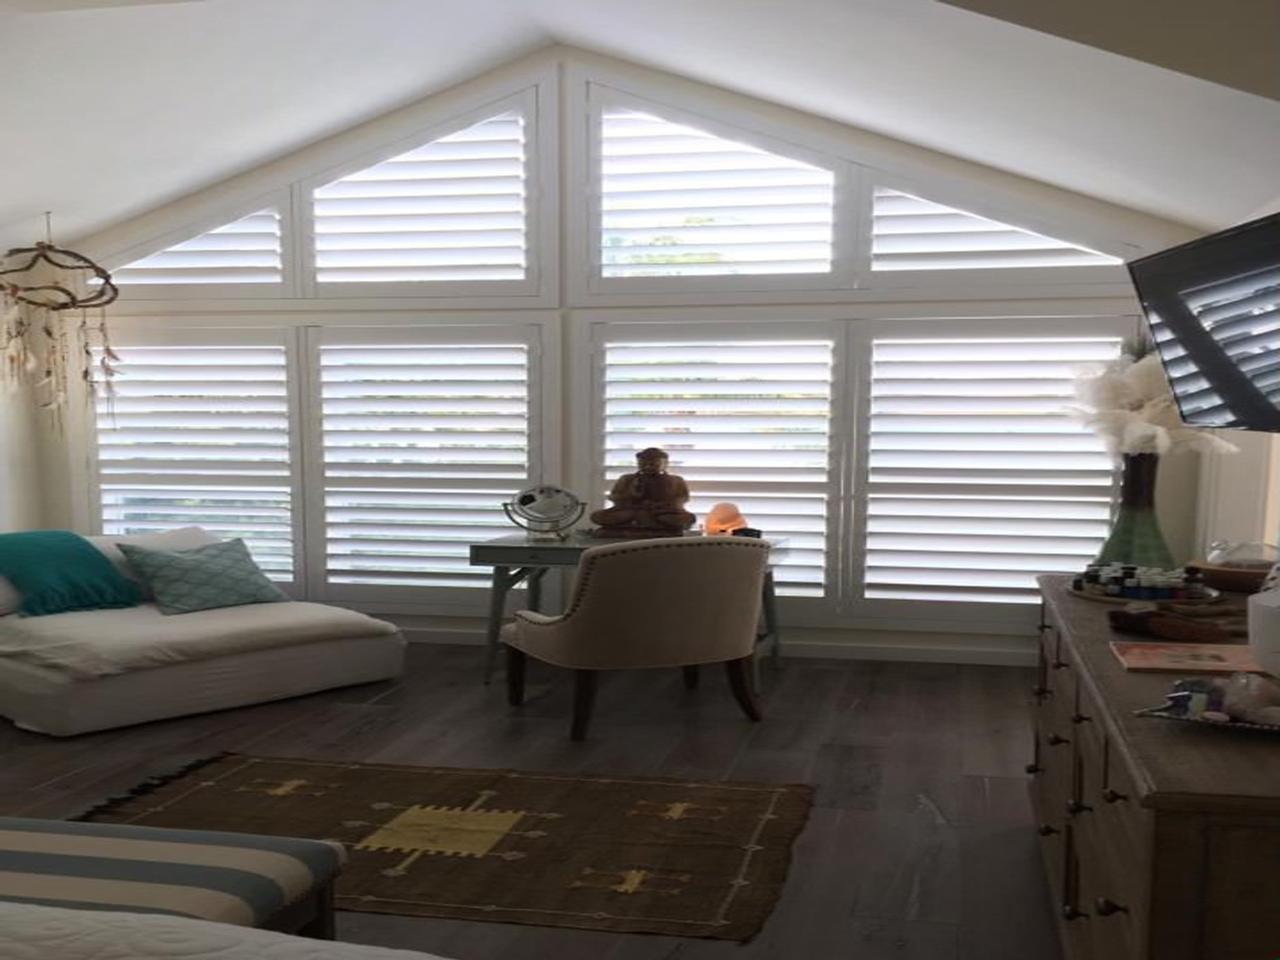 Big specialty shaped windows with Louverwood shutters